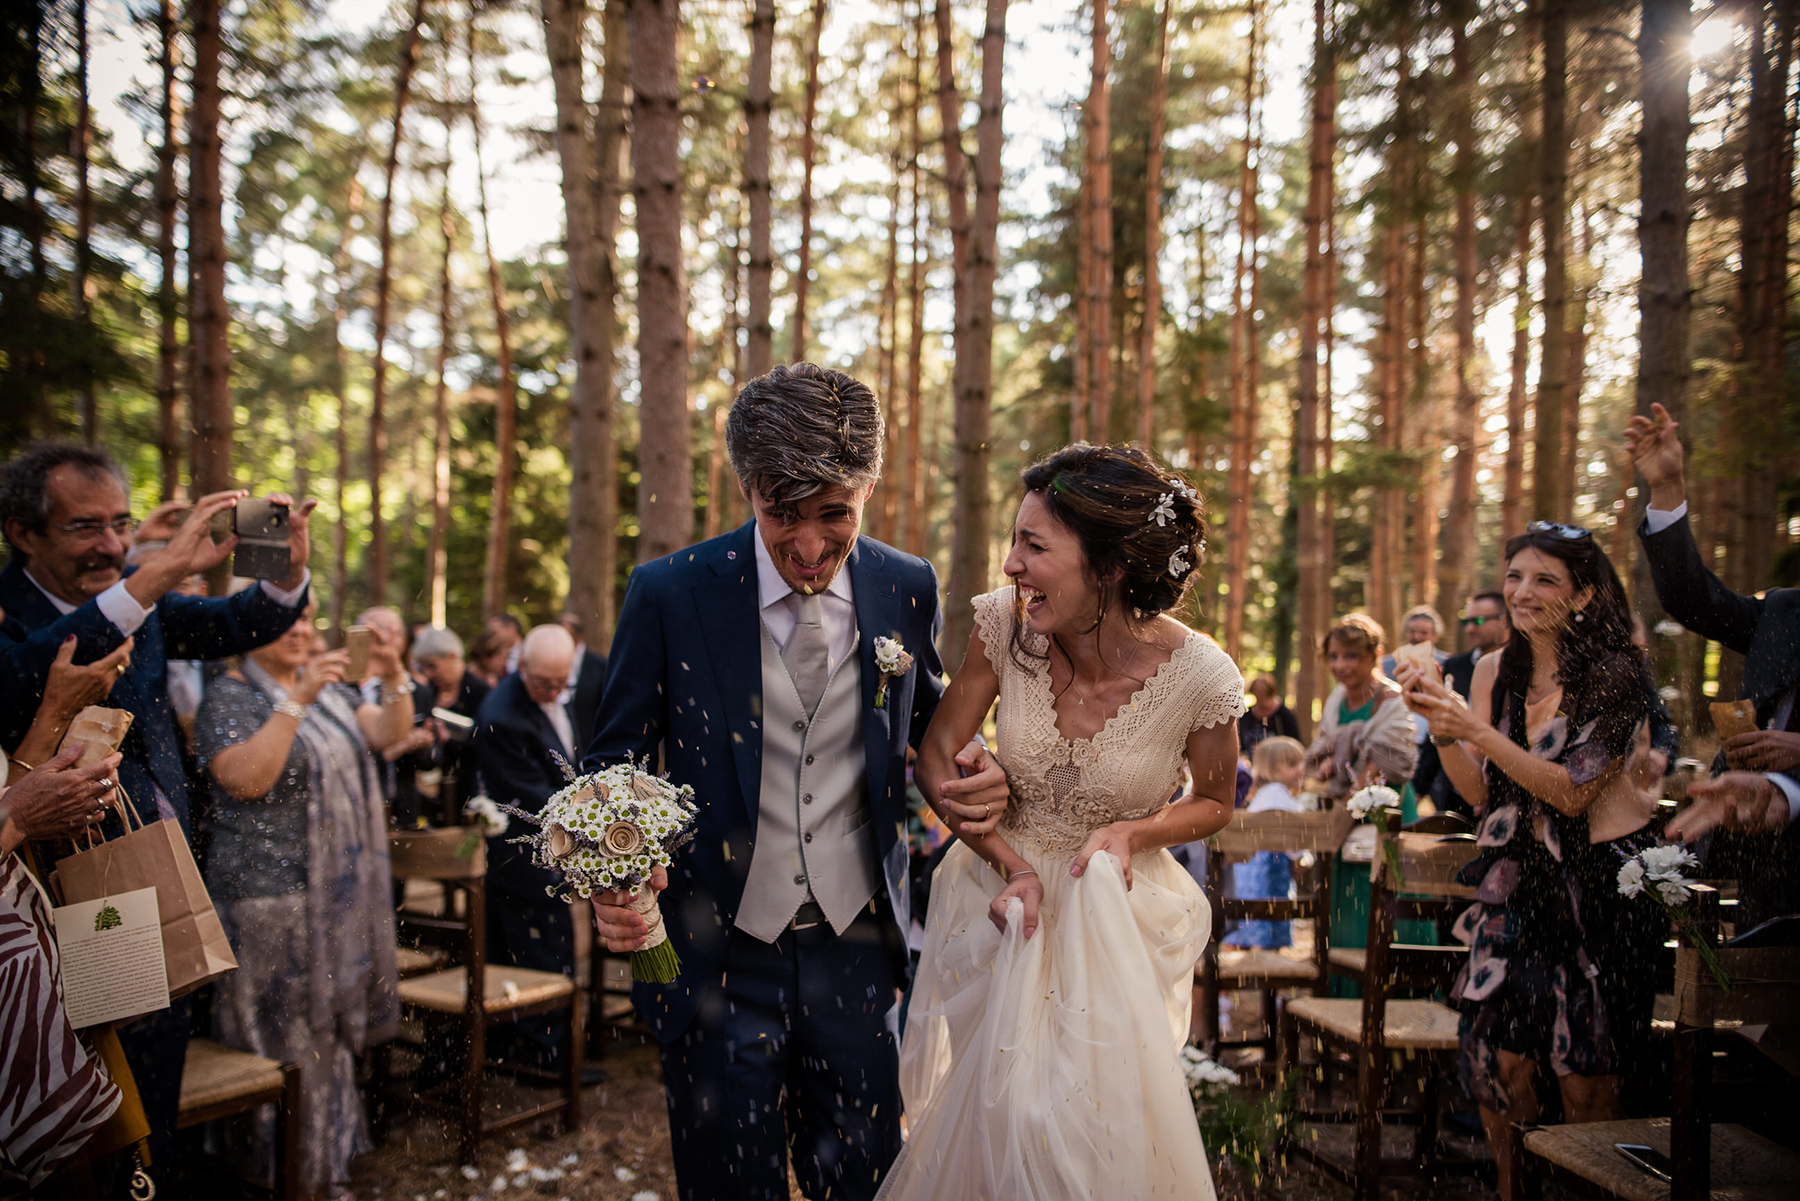 Whimsical Forest Wedding in Italy